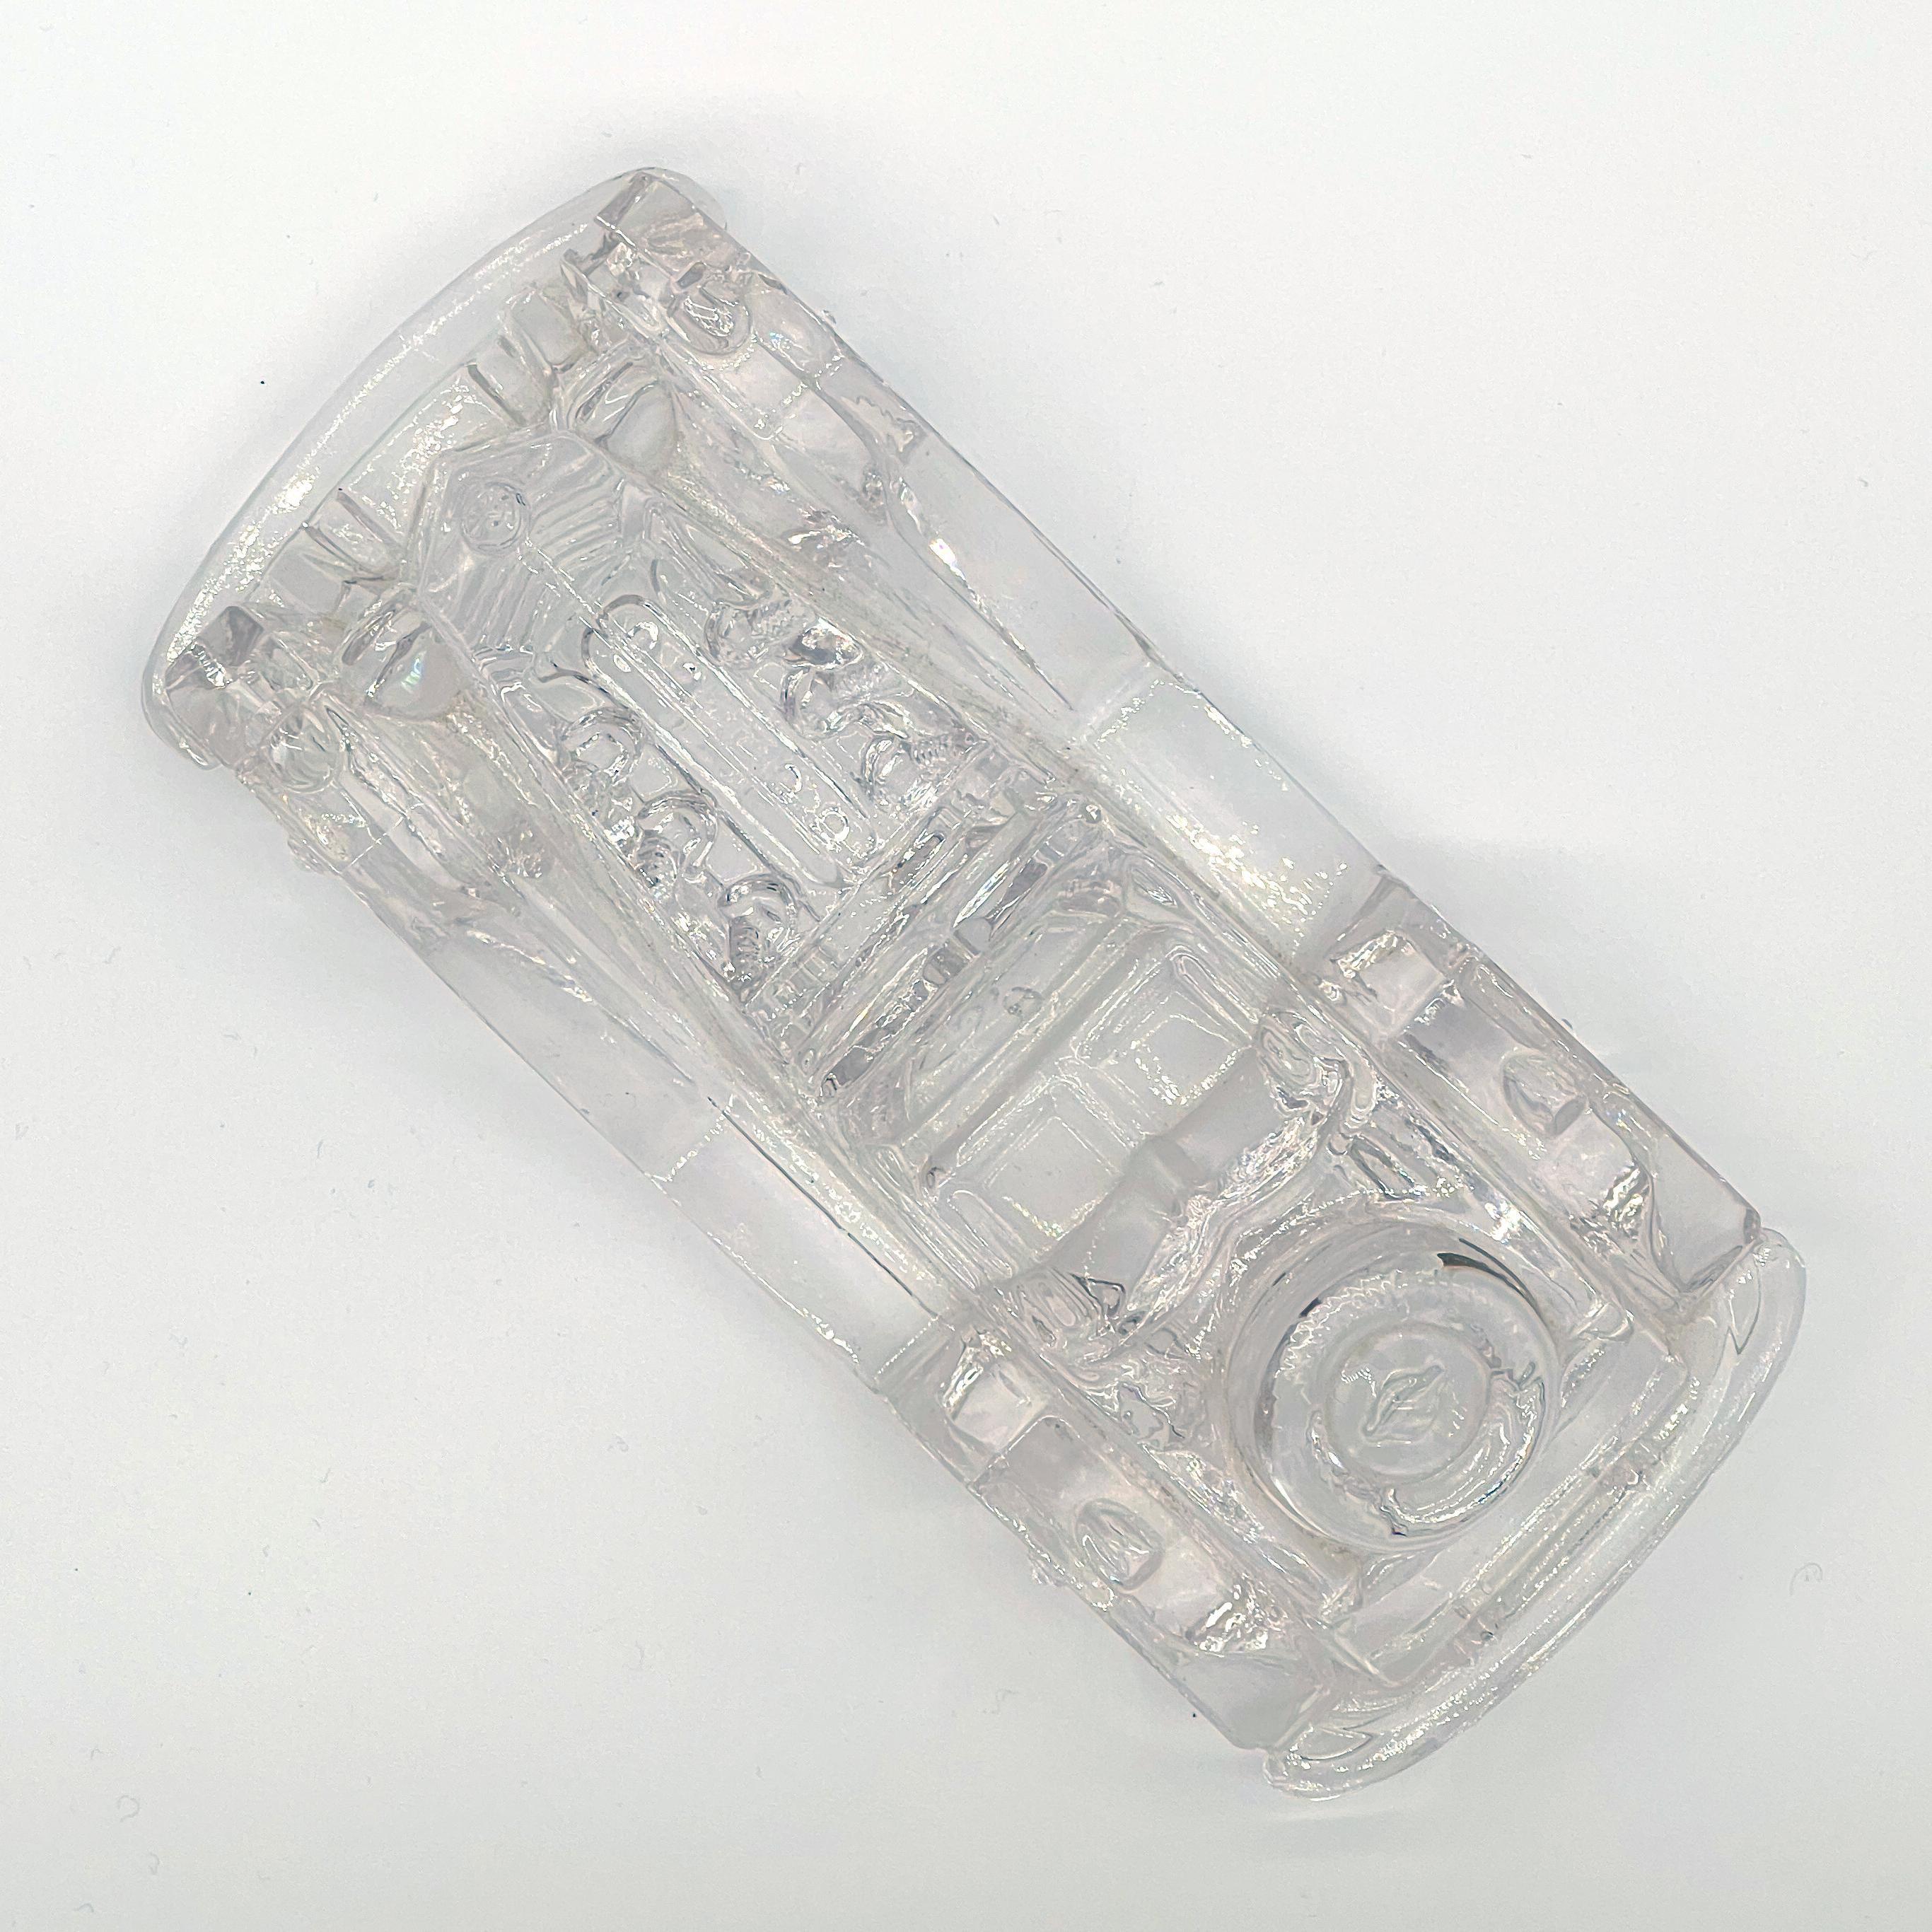 Italian Vintage Clear Crystal Mg Roadster Decorative Model Car / Paperweight For Sale